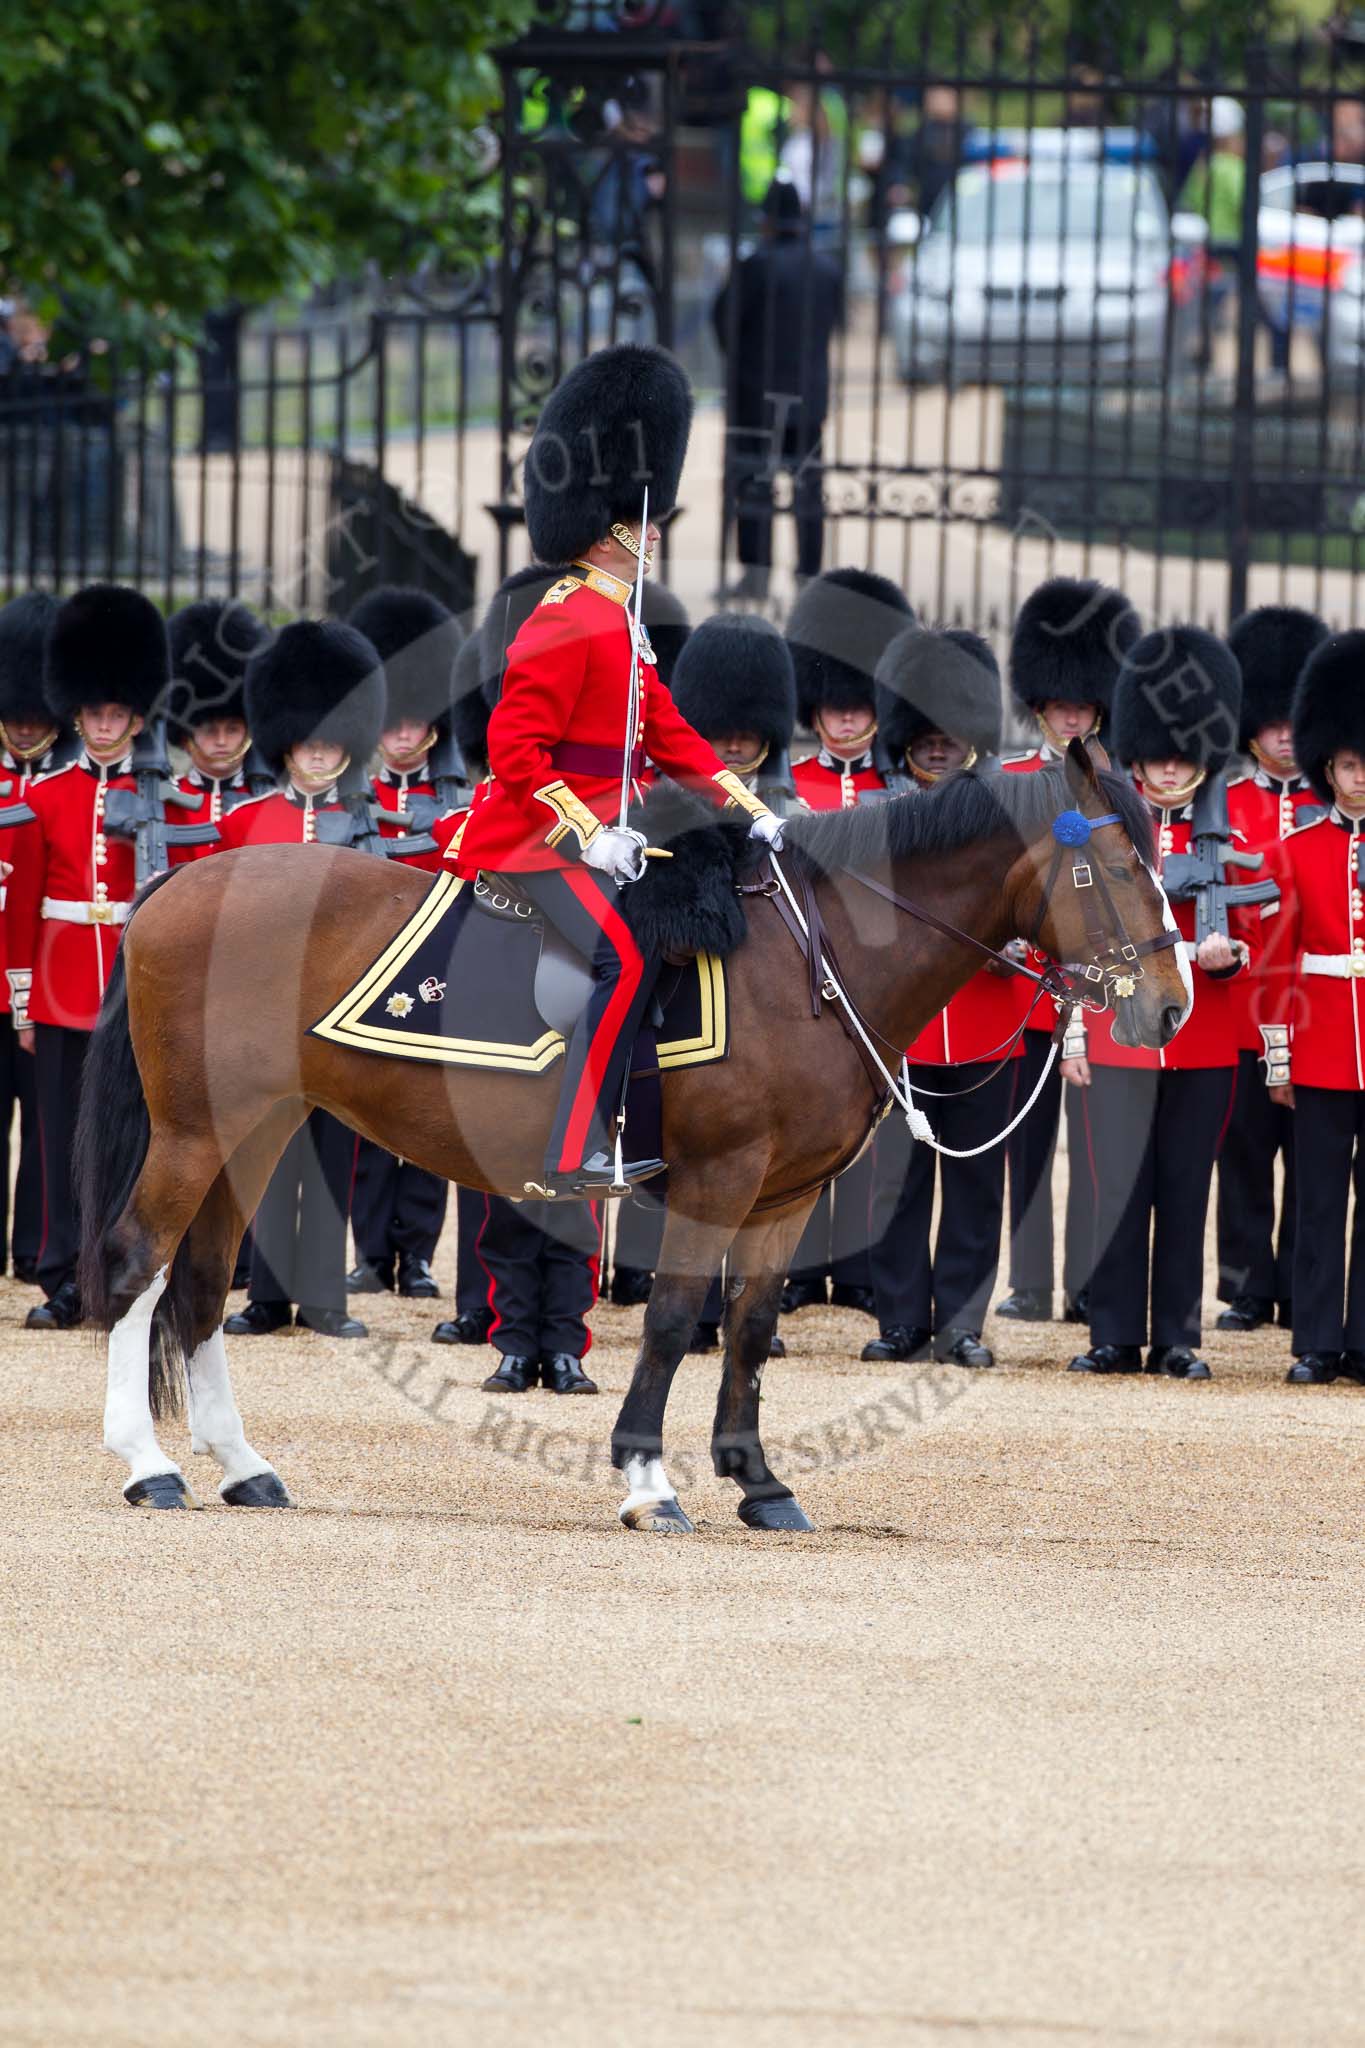 The Major General's Review 2011: The Field Office in Brigade Waiting, Lieutenant Colonel L P M Jopp, Scots Guards, riding 'Burniston'. Behind, No. 3 (?) Guard, F Company Scots Guards, behind them St. James's Park..
Horse Guards Parade, Westminster,
London SW1,
Greater London,
United Kingdom,
on 28 May 2011 at 10:49, image #84